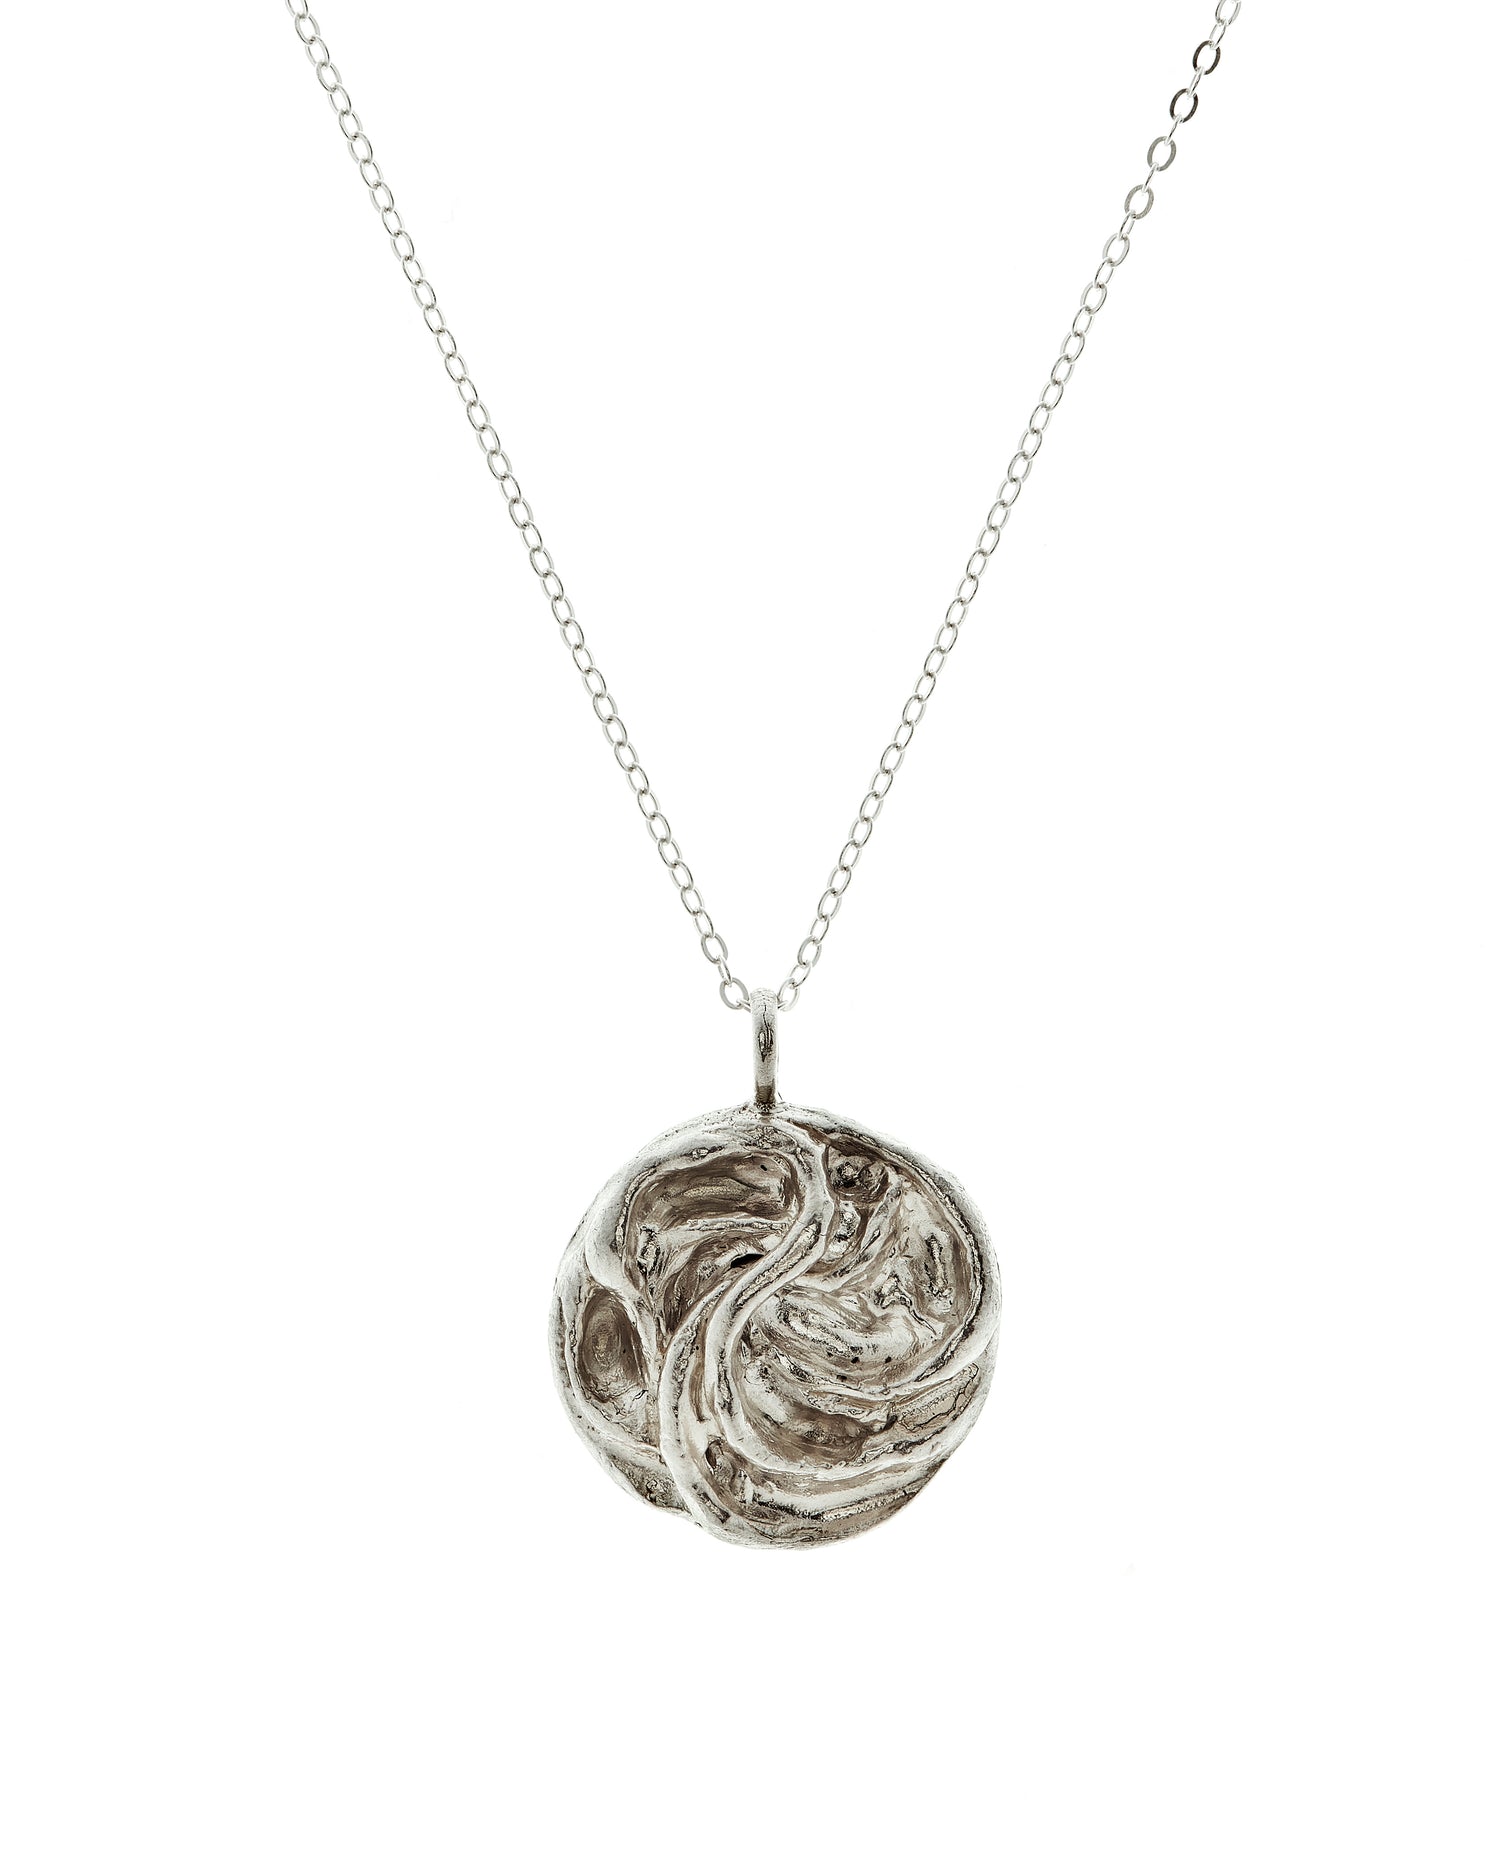 Sterling silver necklace polished and designed in flowing organic shape